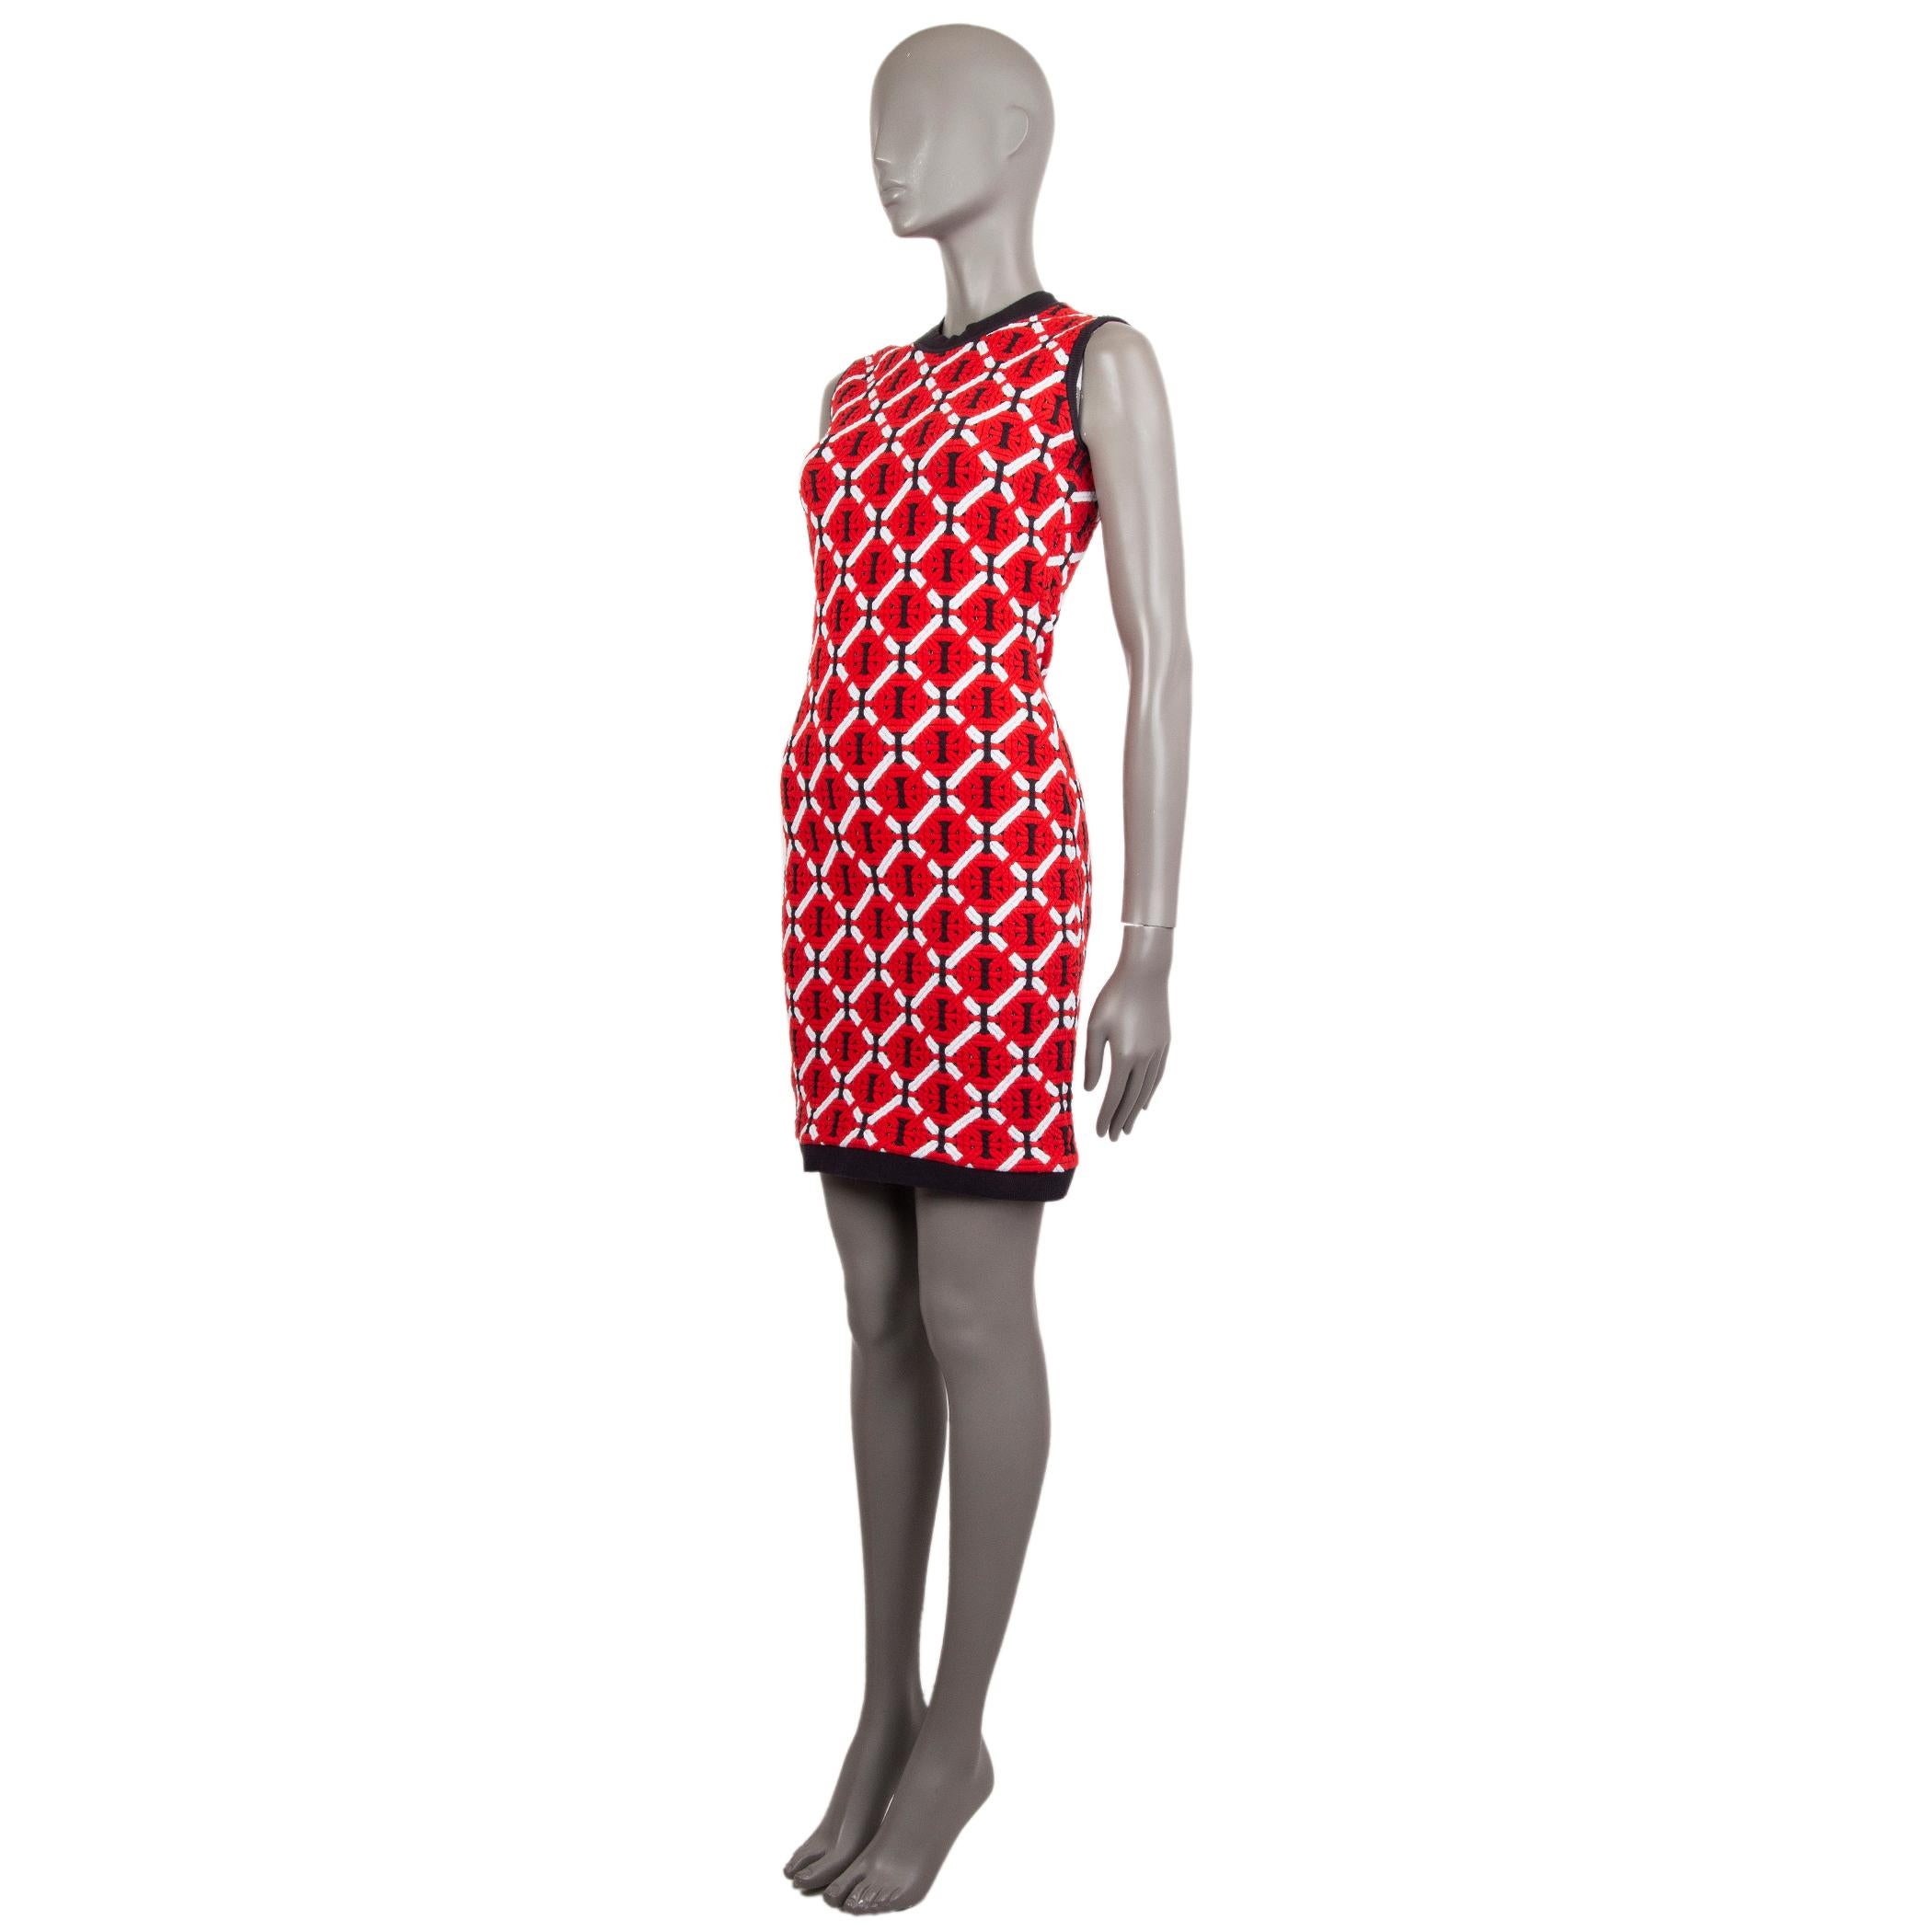 100% authentic Dsquared2 jacquard-knit bodycon dress in red, white, and black cotton (95%) and elastane (5%). Unlined. Has been worn and is in excellent condition. 

Measurements
Tag Size	M
Size	M
Bust	80cm (31.2in) to 100cm (39in)
Waist	66cm